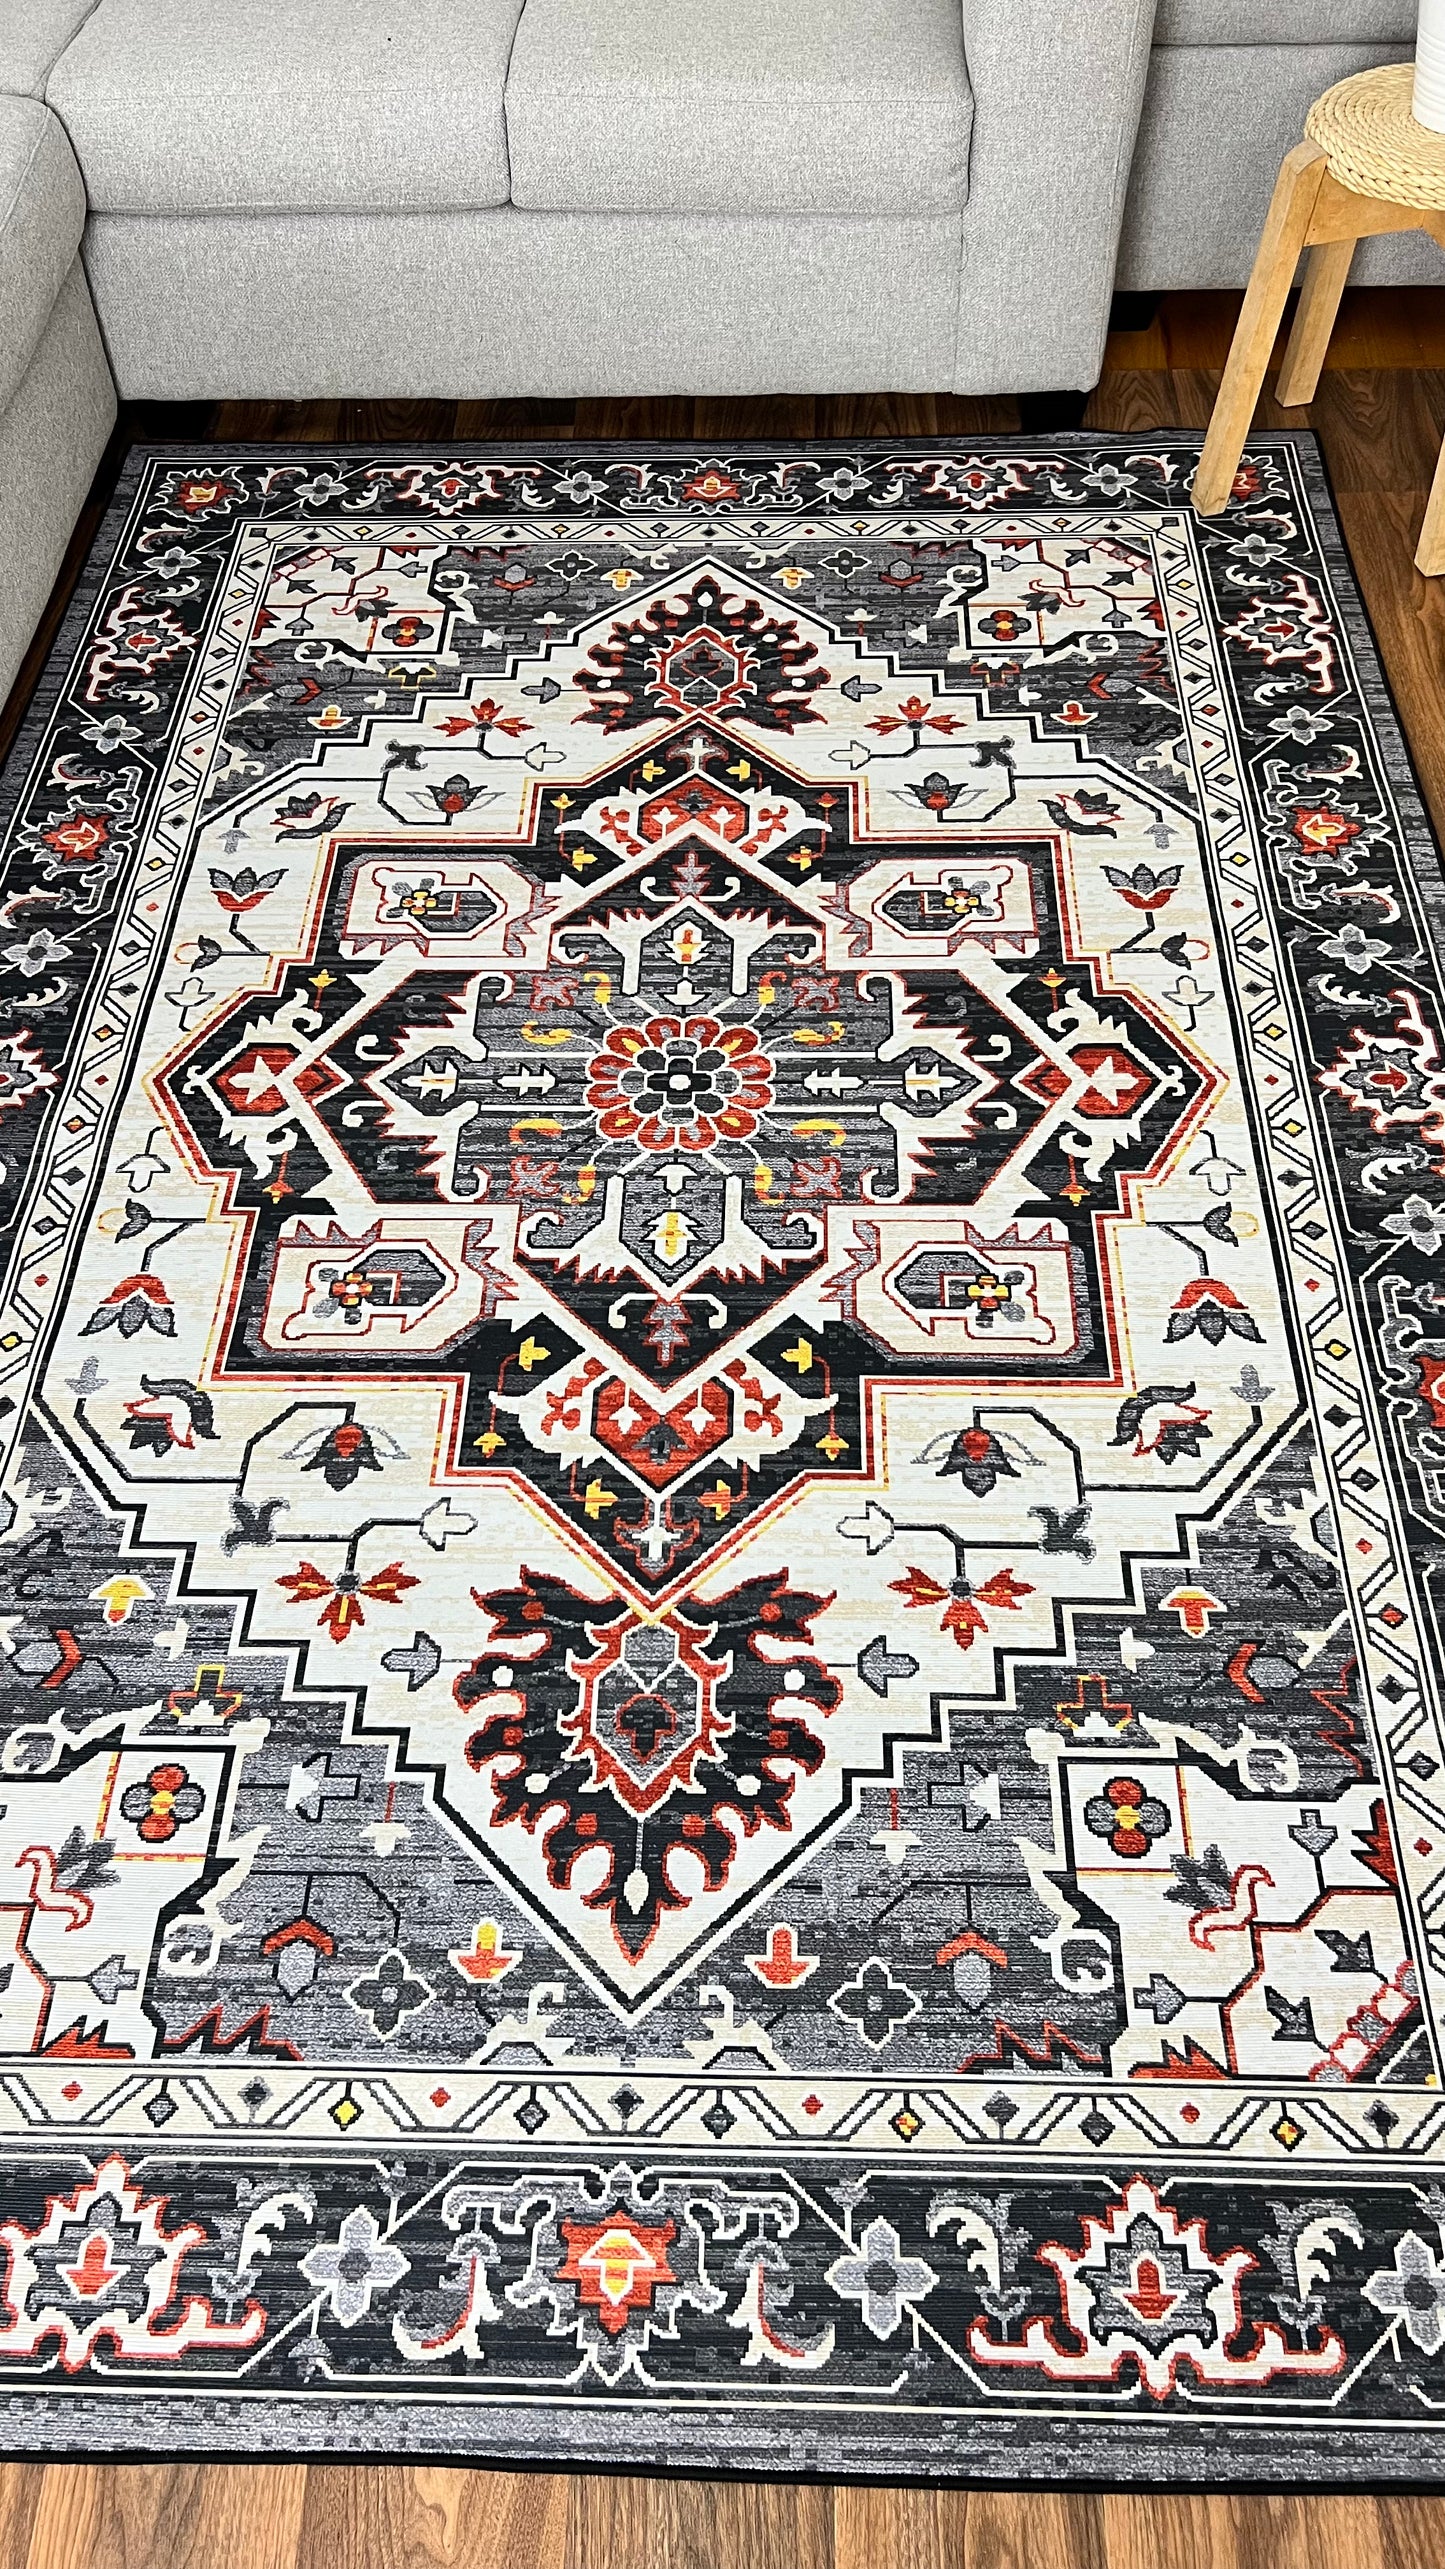 Artful Threads: Persian Rugs Beyond Compare